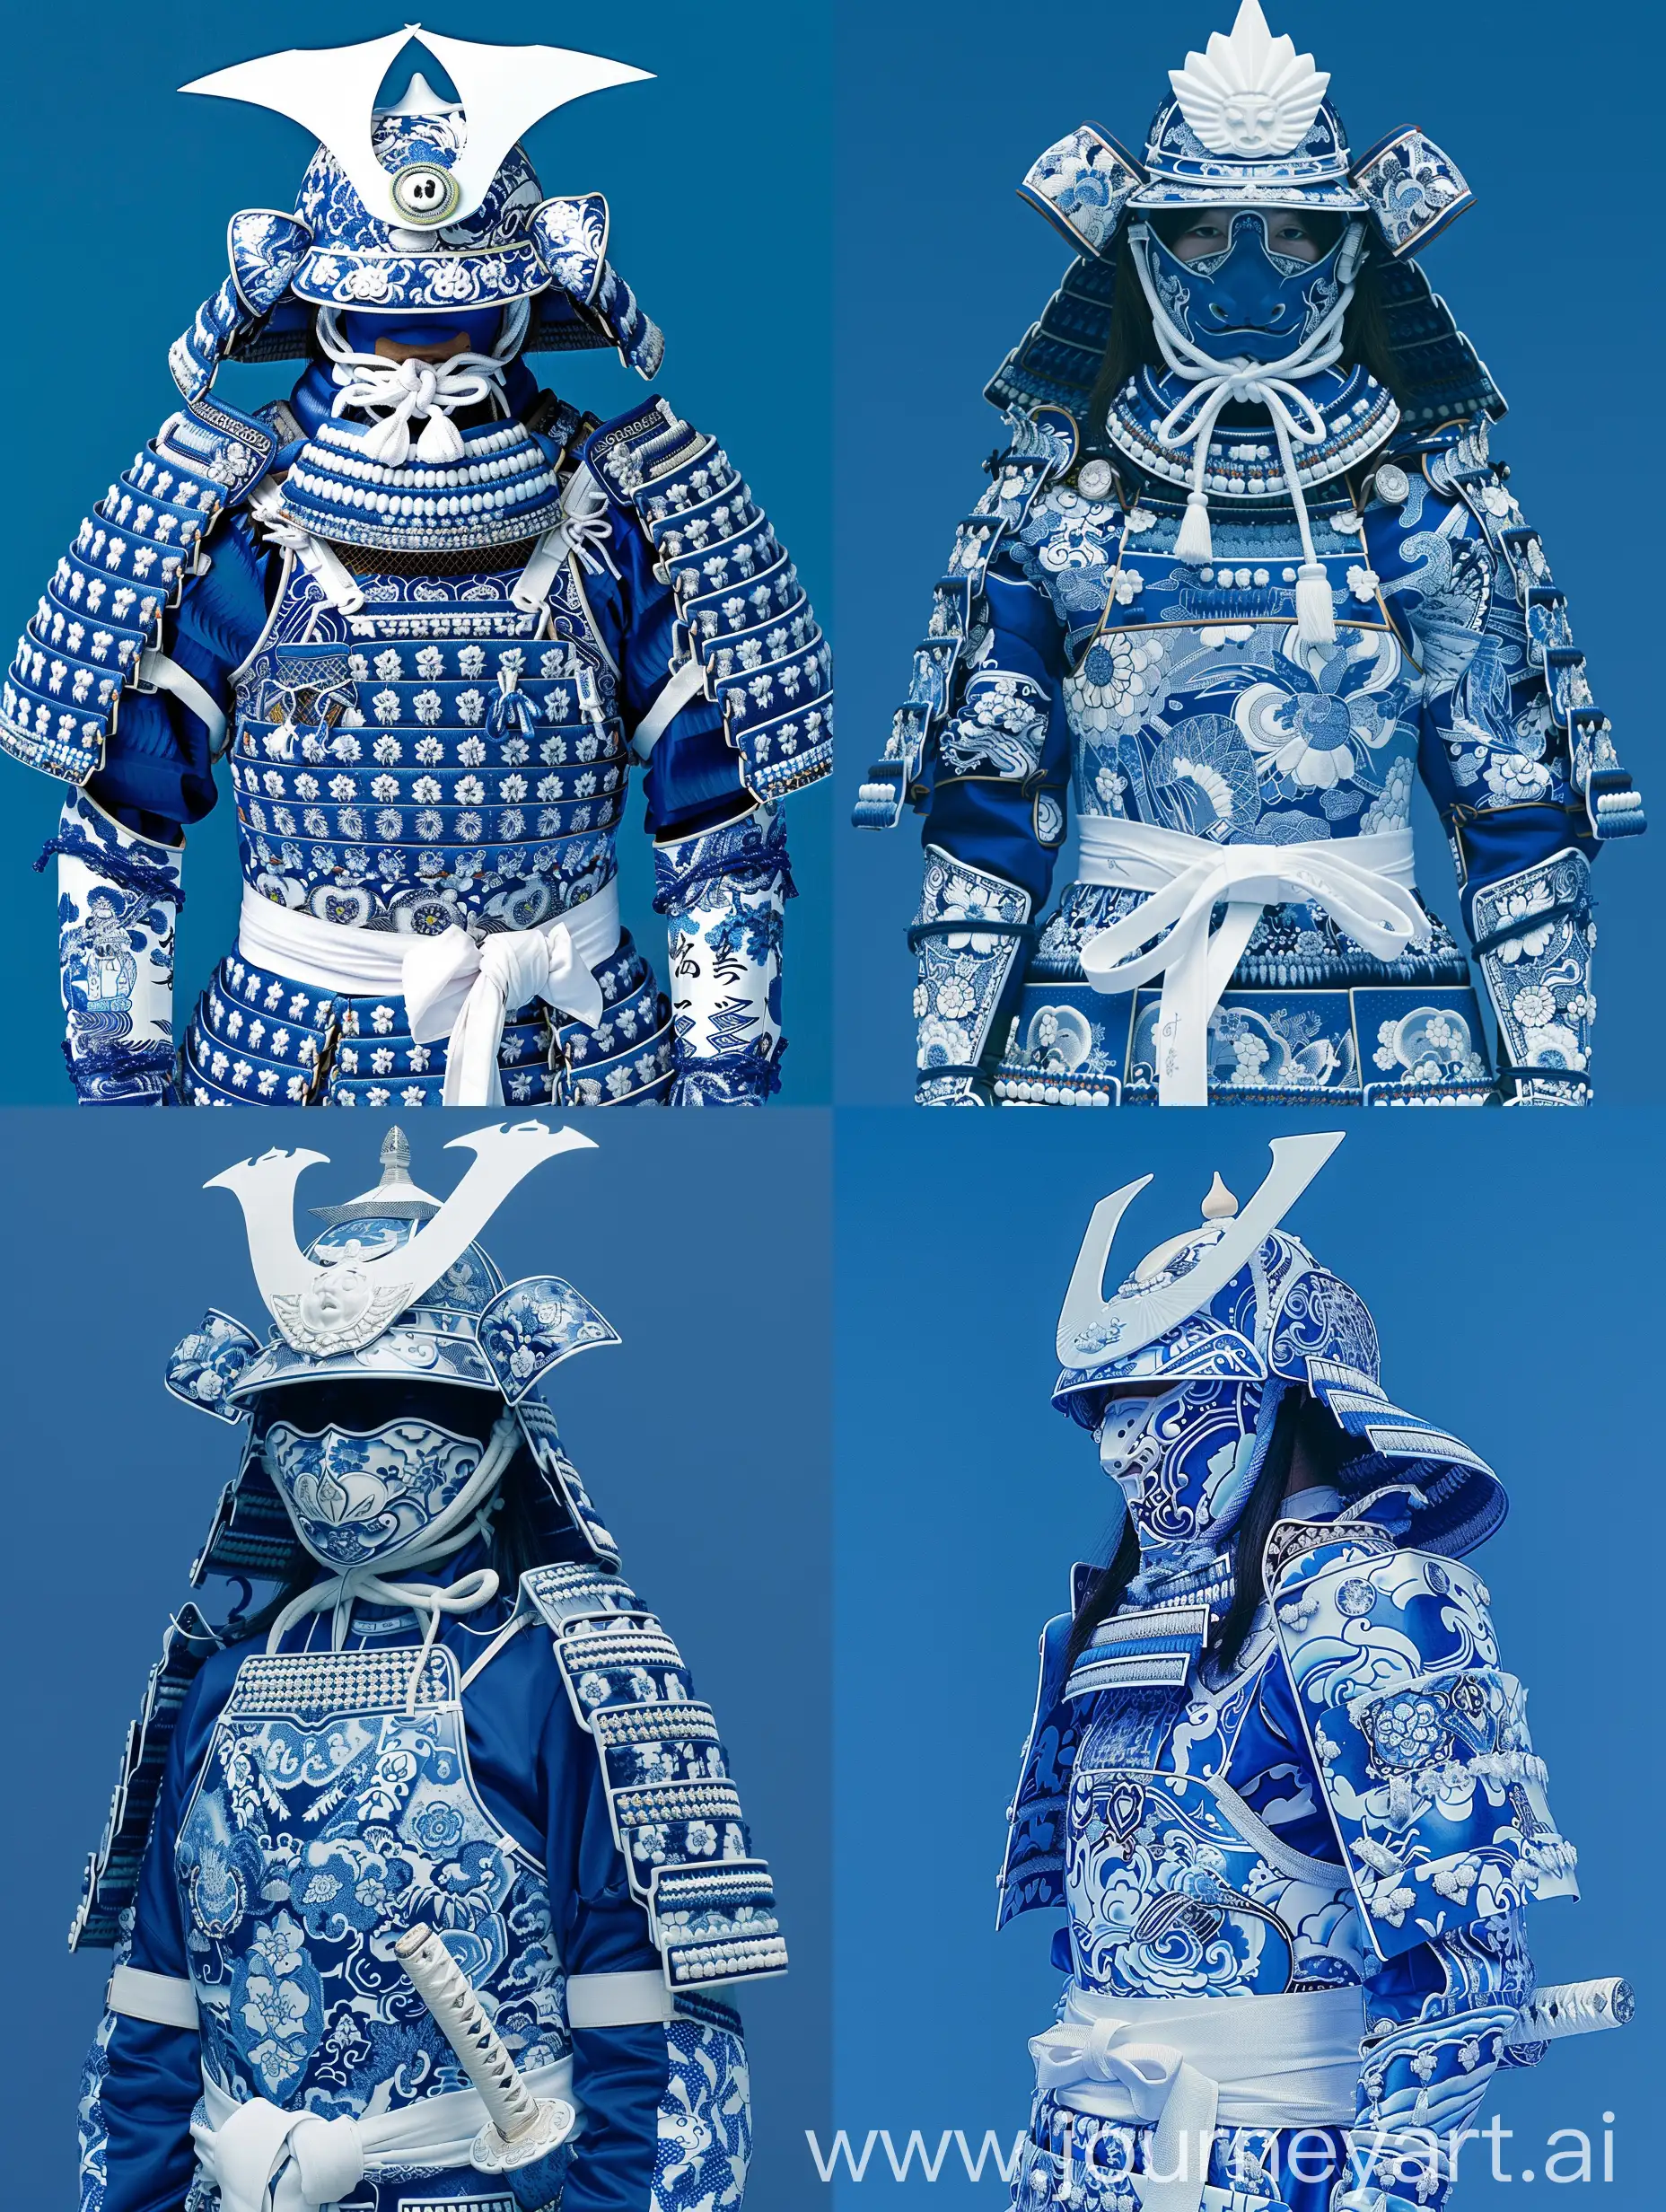 A person dressed in ornate, blue and white samurai armor, featuring intricate patterns and designs resembling traditional Asian porcelain art. The helmet is adorned with a prominent white crest and decorative elements. The outfit includes a white belt tied at the waist and a sheathed sword. The background is a solid blue, complementing the colors of the armor.